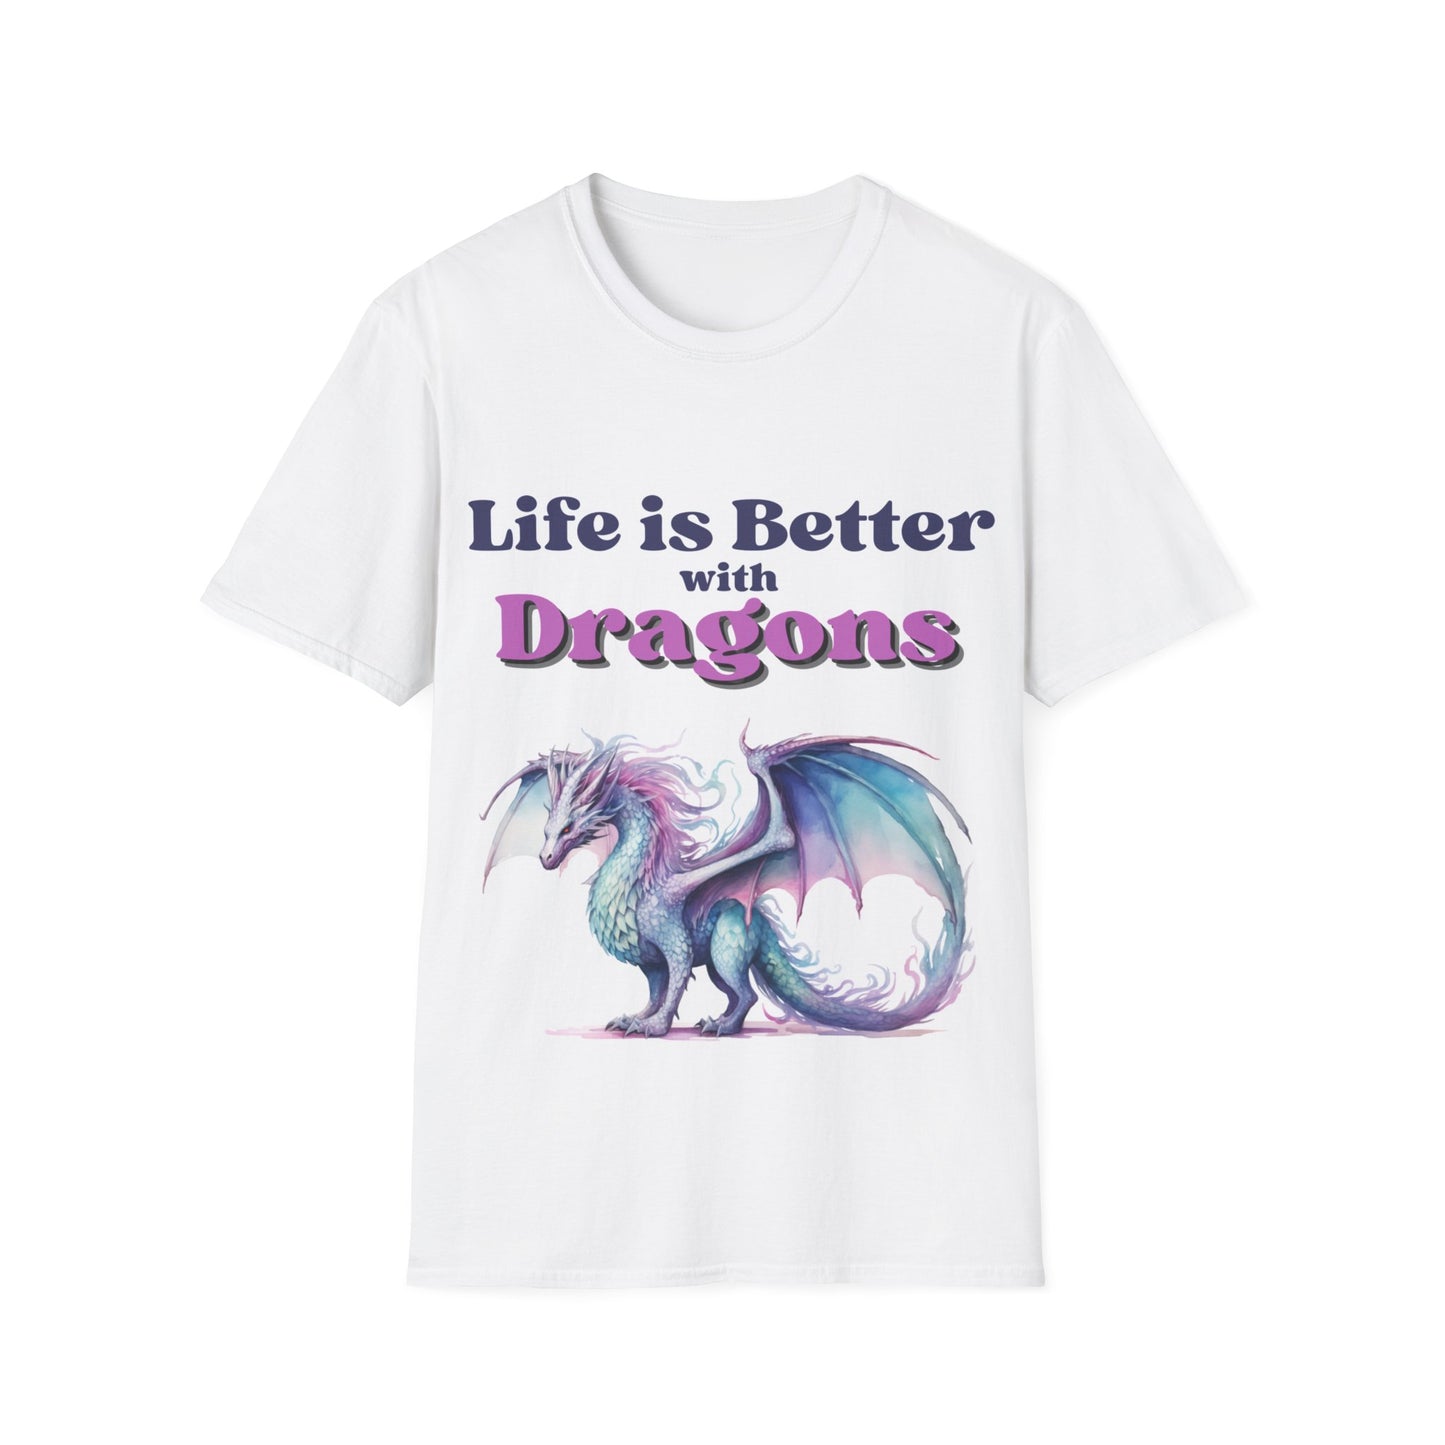 Life is Better with Dragons, Unisex Softstyle T-Shirt